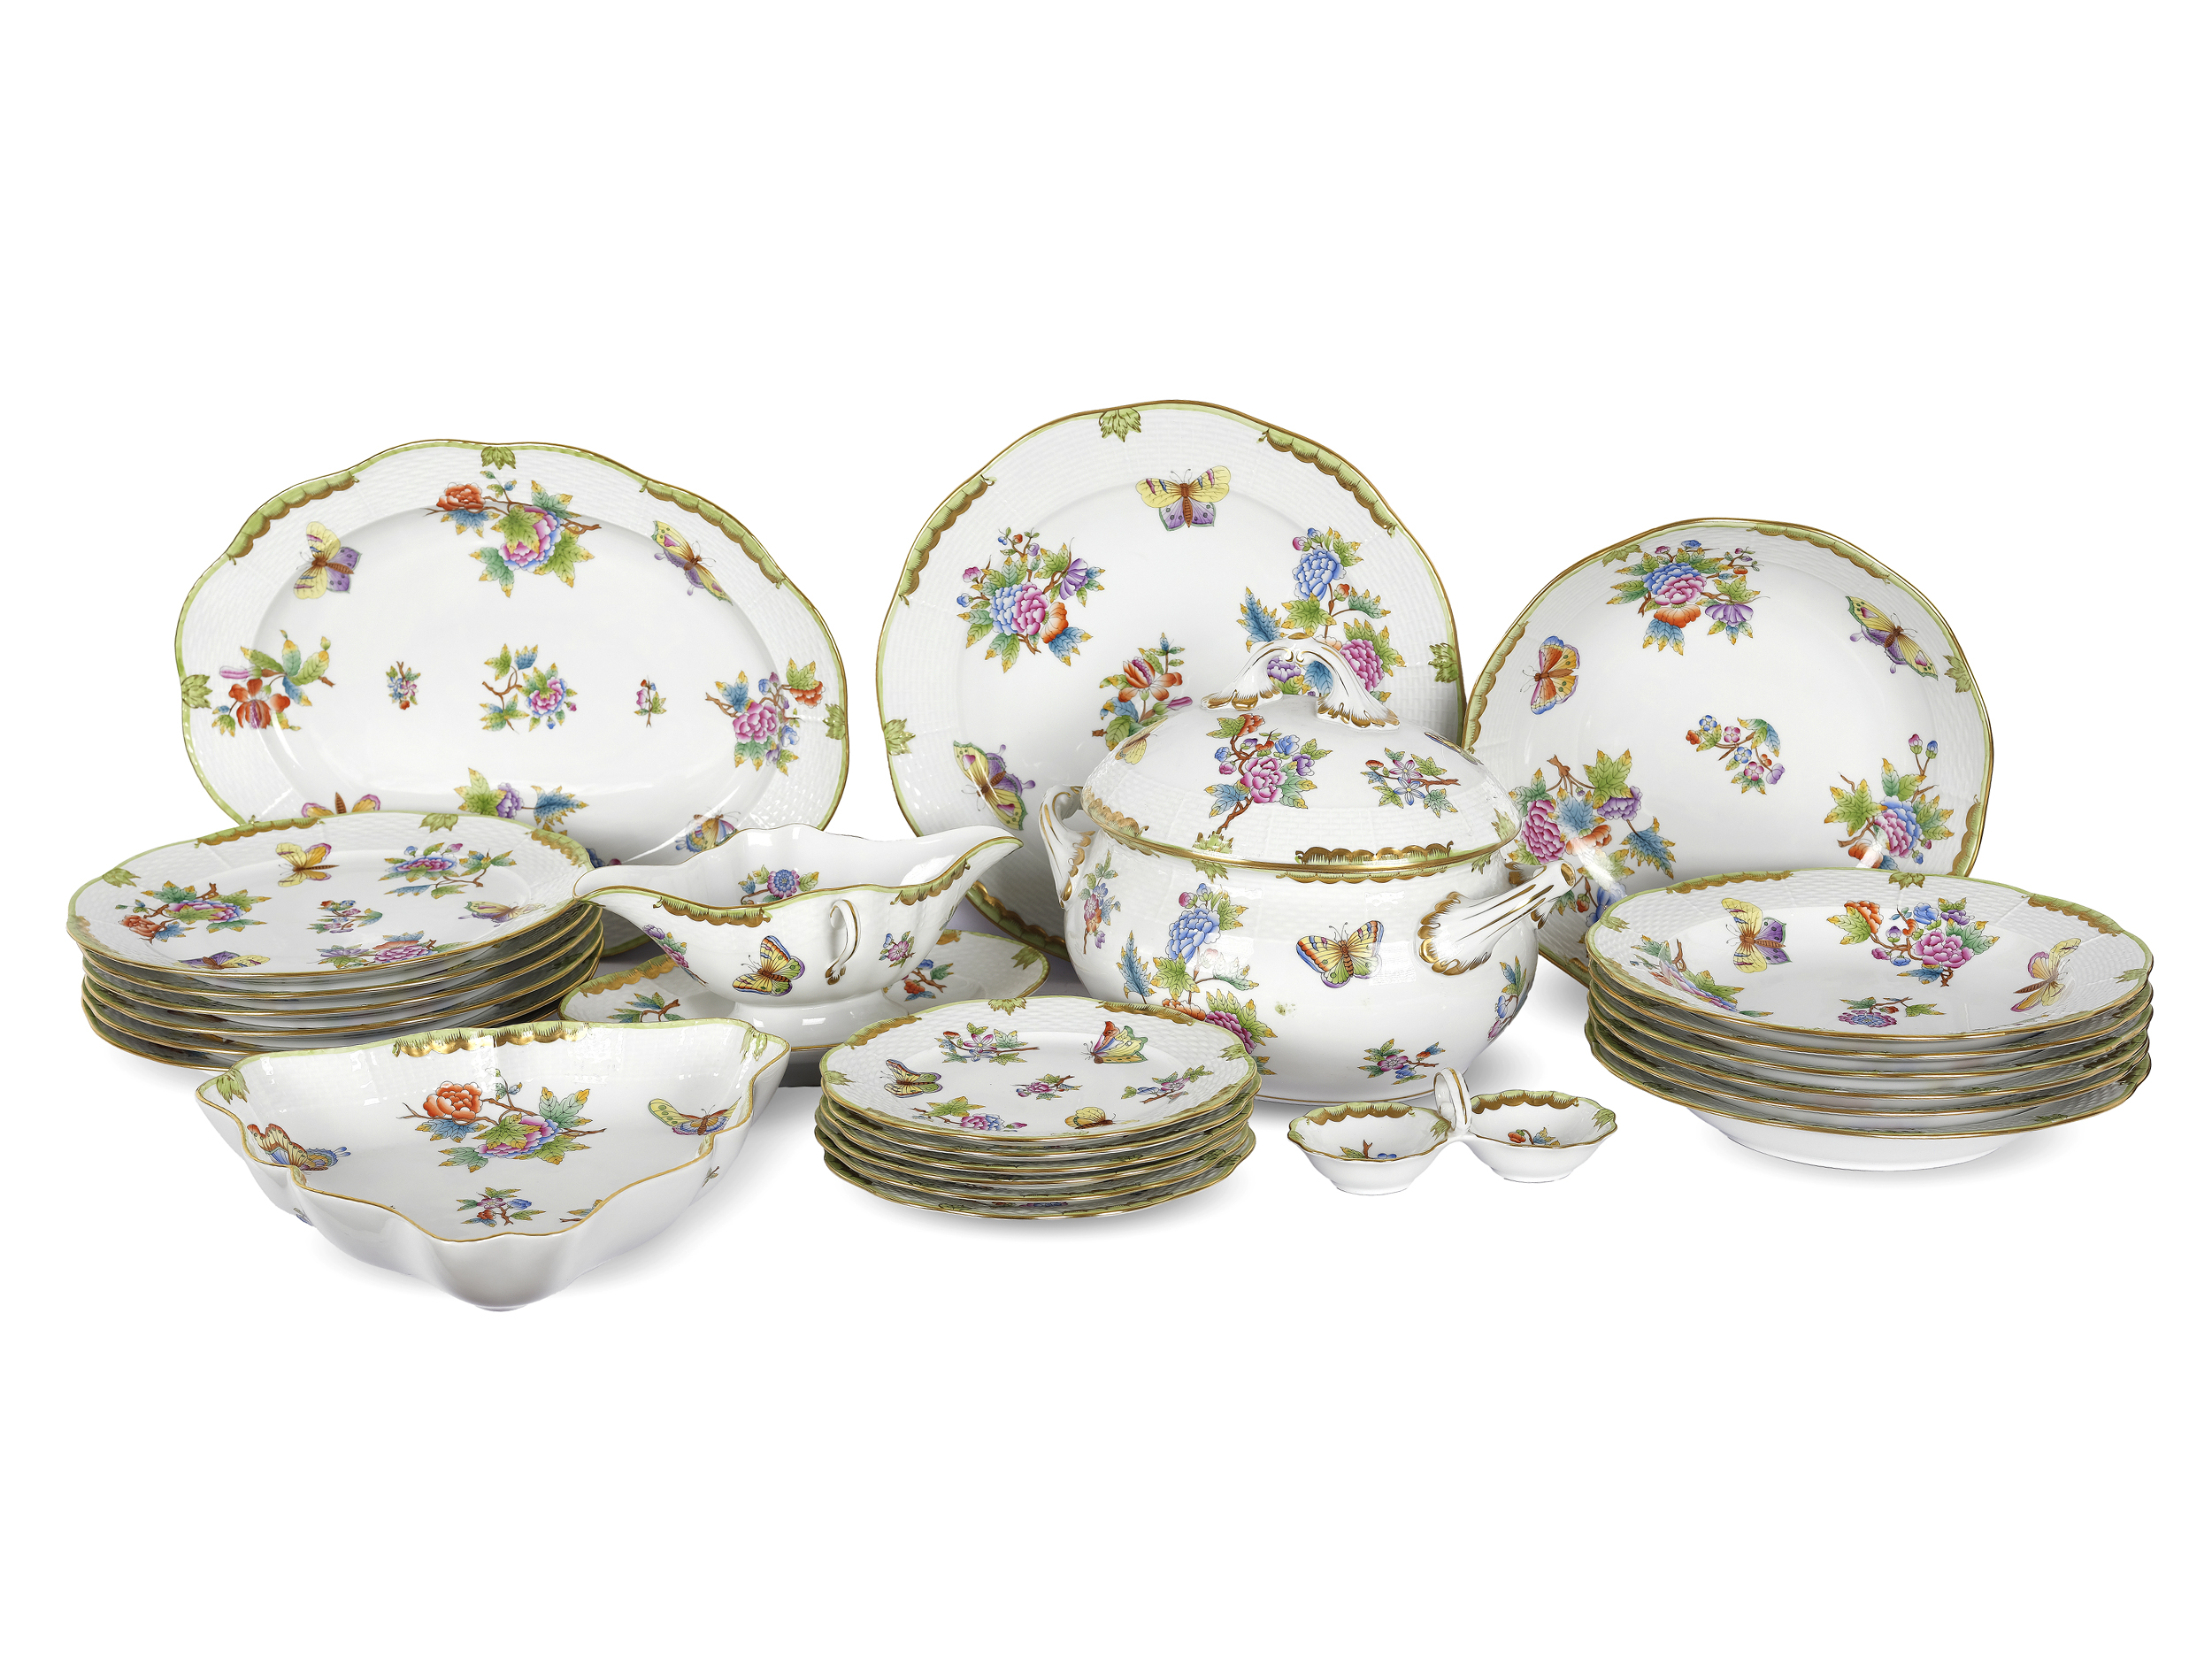 Dinner service for 6 persons, 25-piece, Herend, Victoria decor